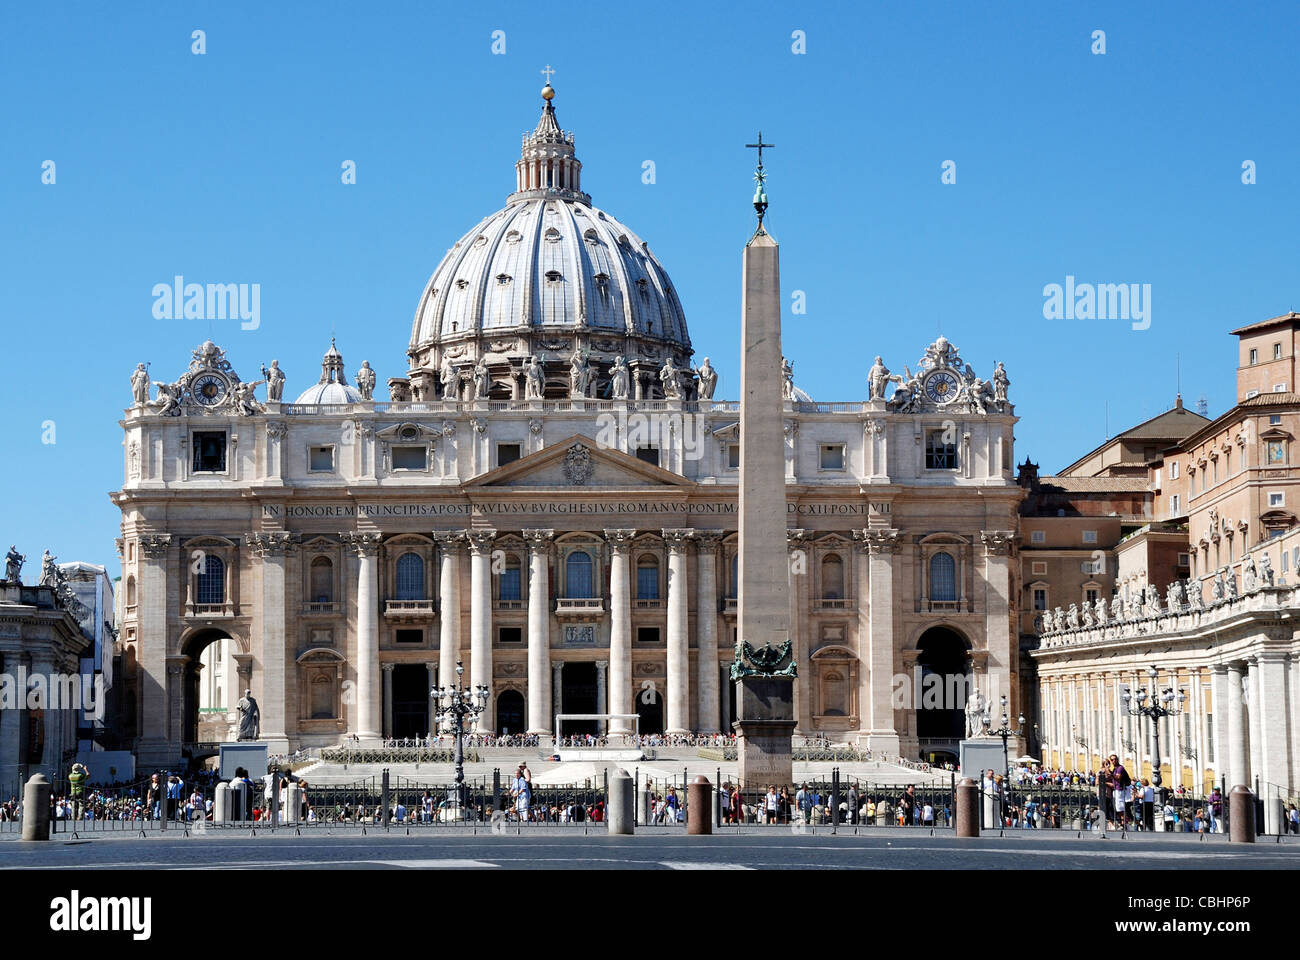 Saint Peters Basilica on the Saint Peters Square in Vatican City in Rome. Stock Photo